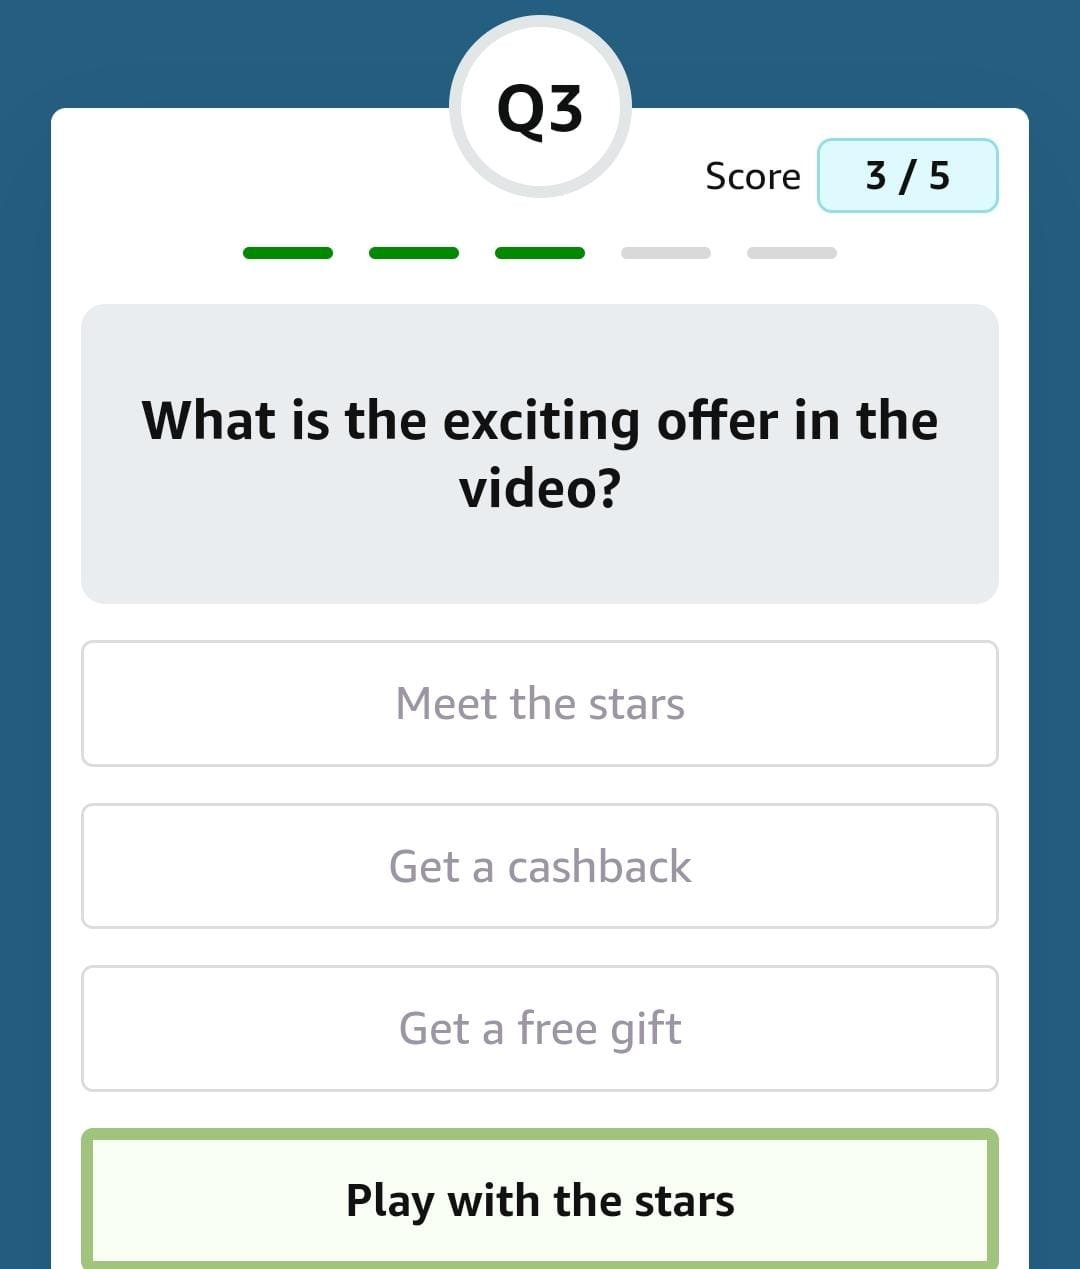 What is the exciting offer in the video